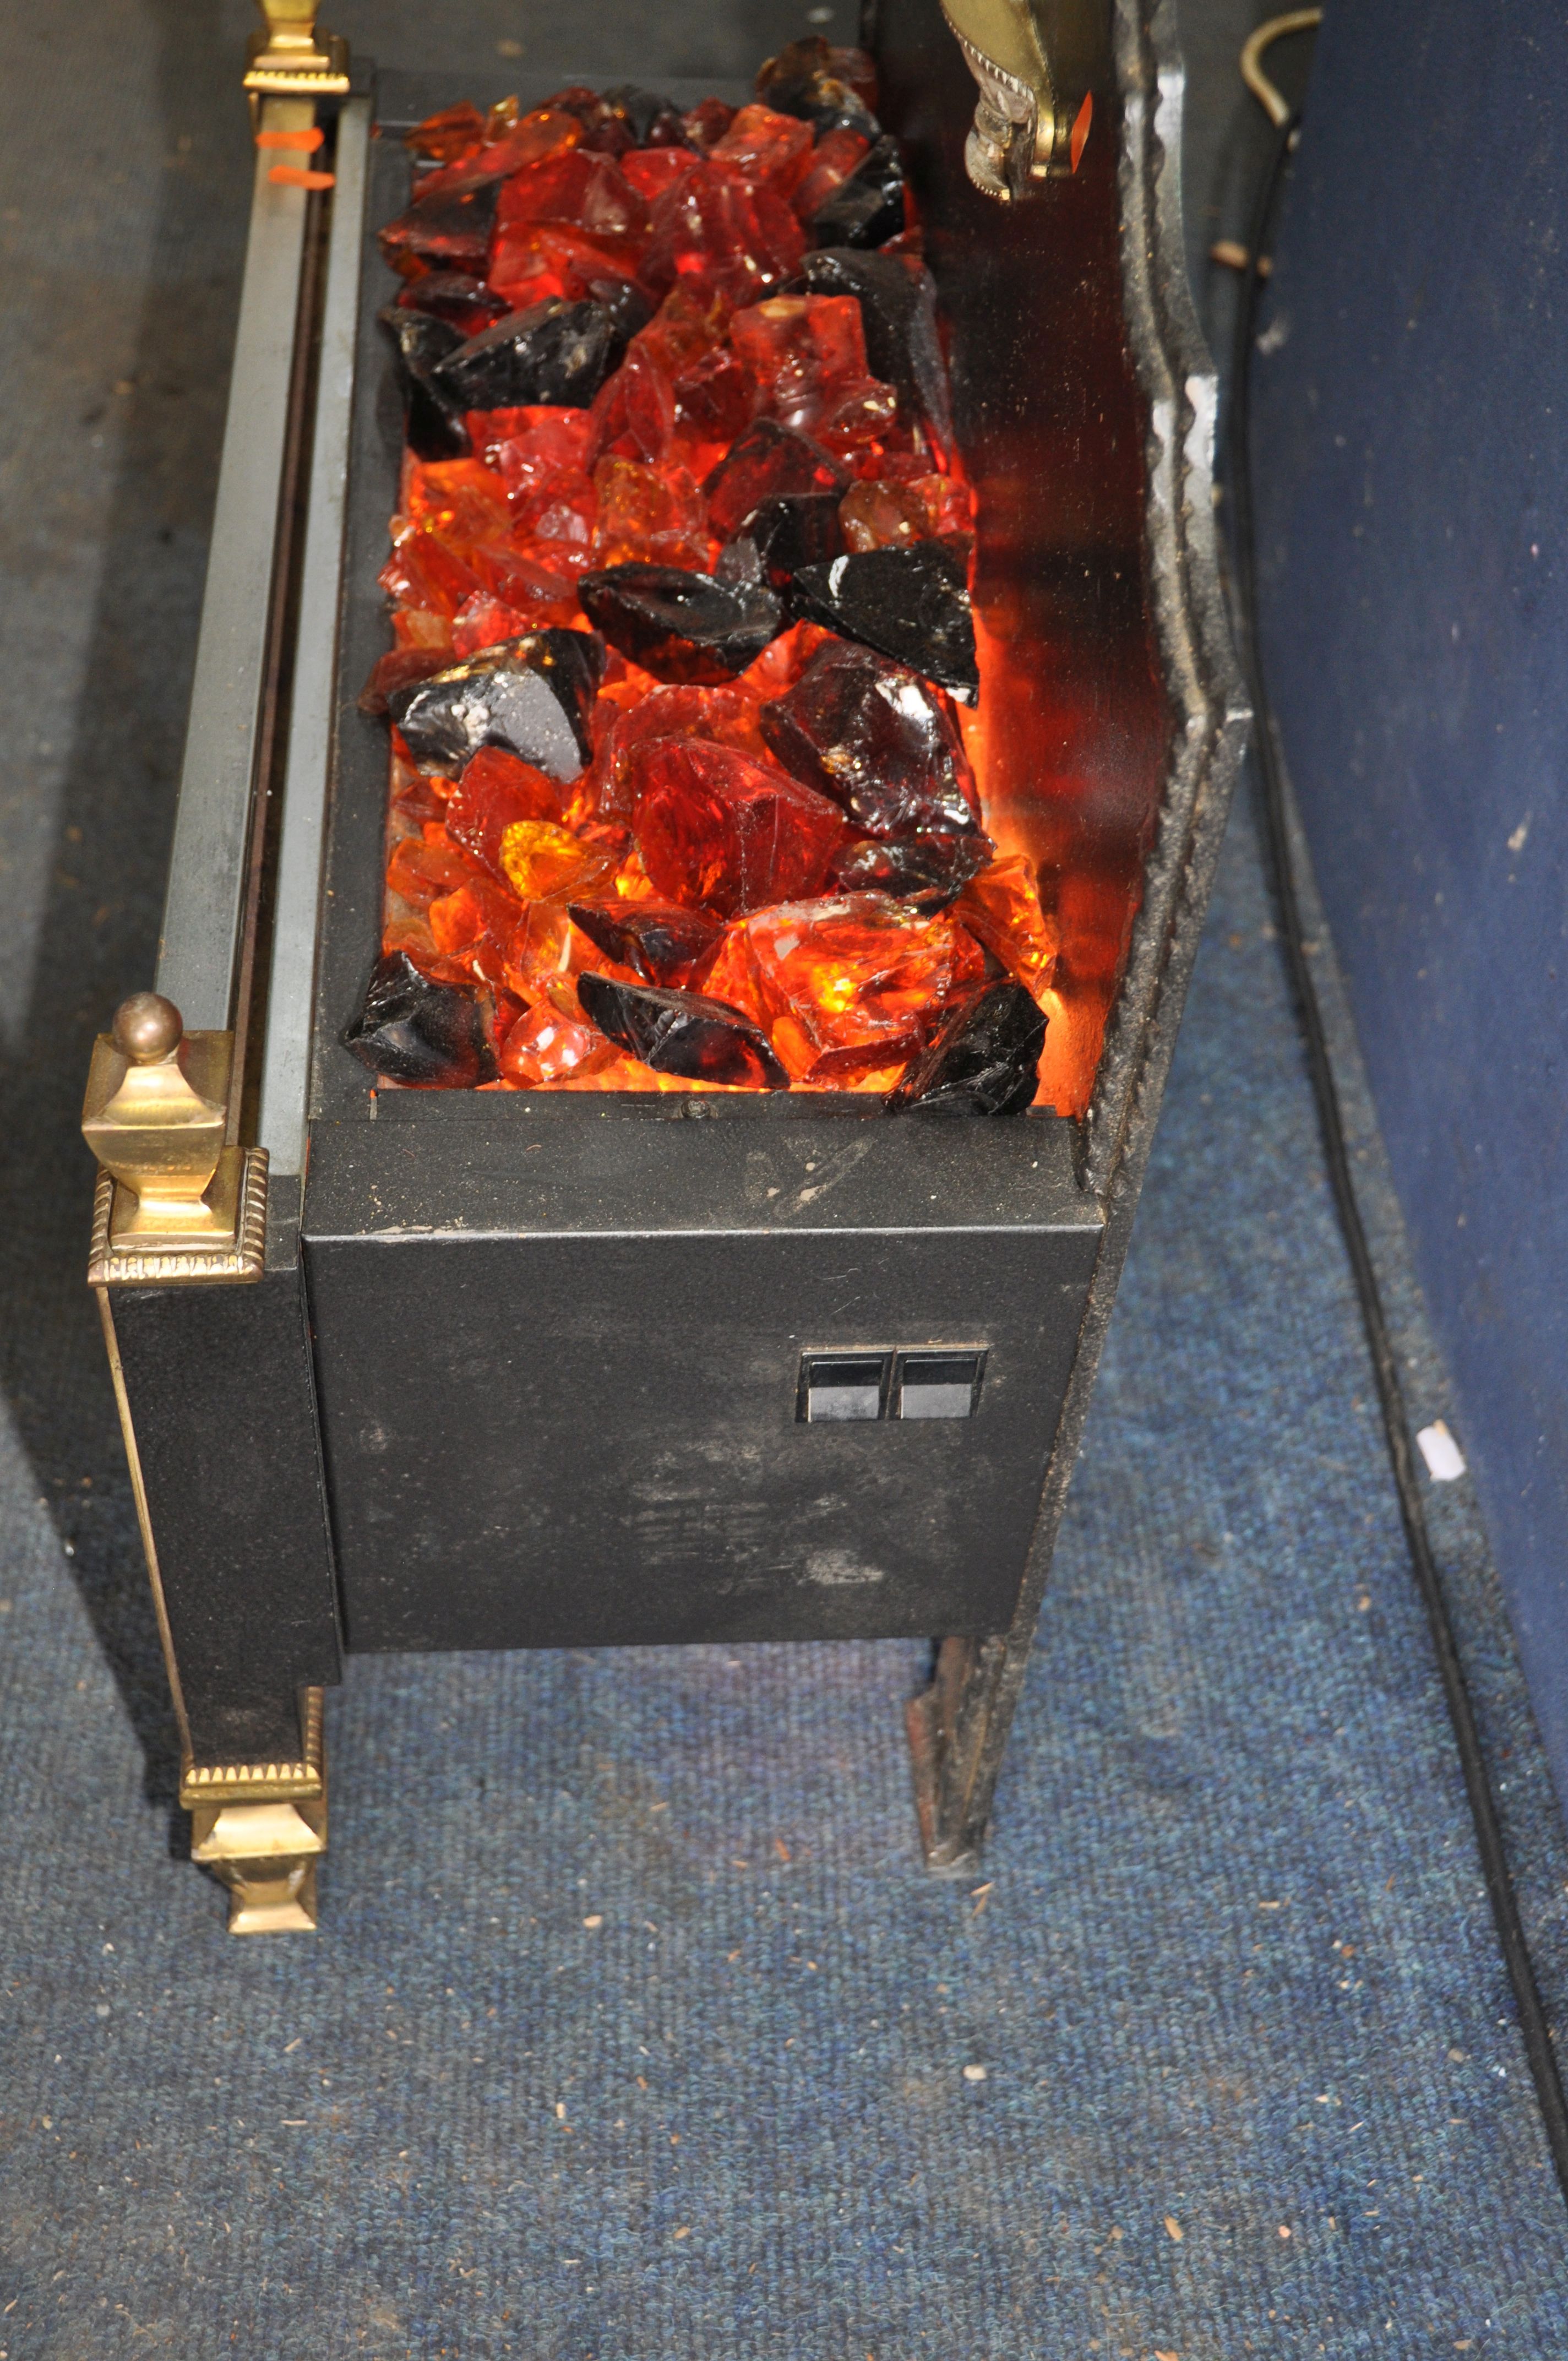 A BERRY MAGICOAL 513 LINCOLN COAL EFFECT ELECTRIC FIRE with amber crystal 'coals', three bars on two - Image 2 of 2